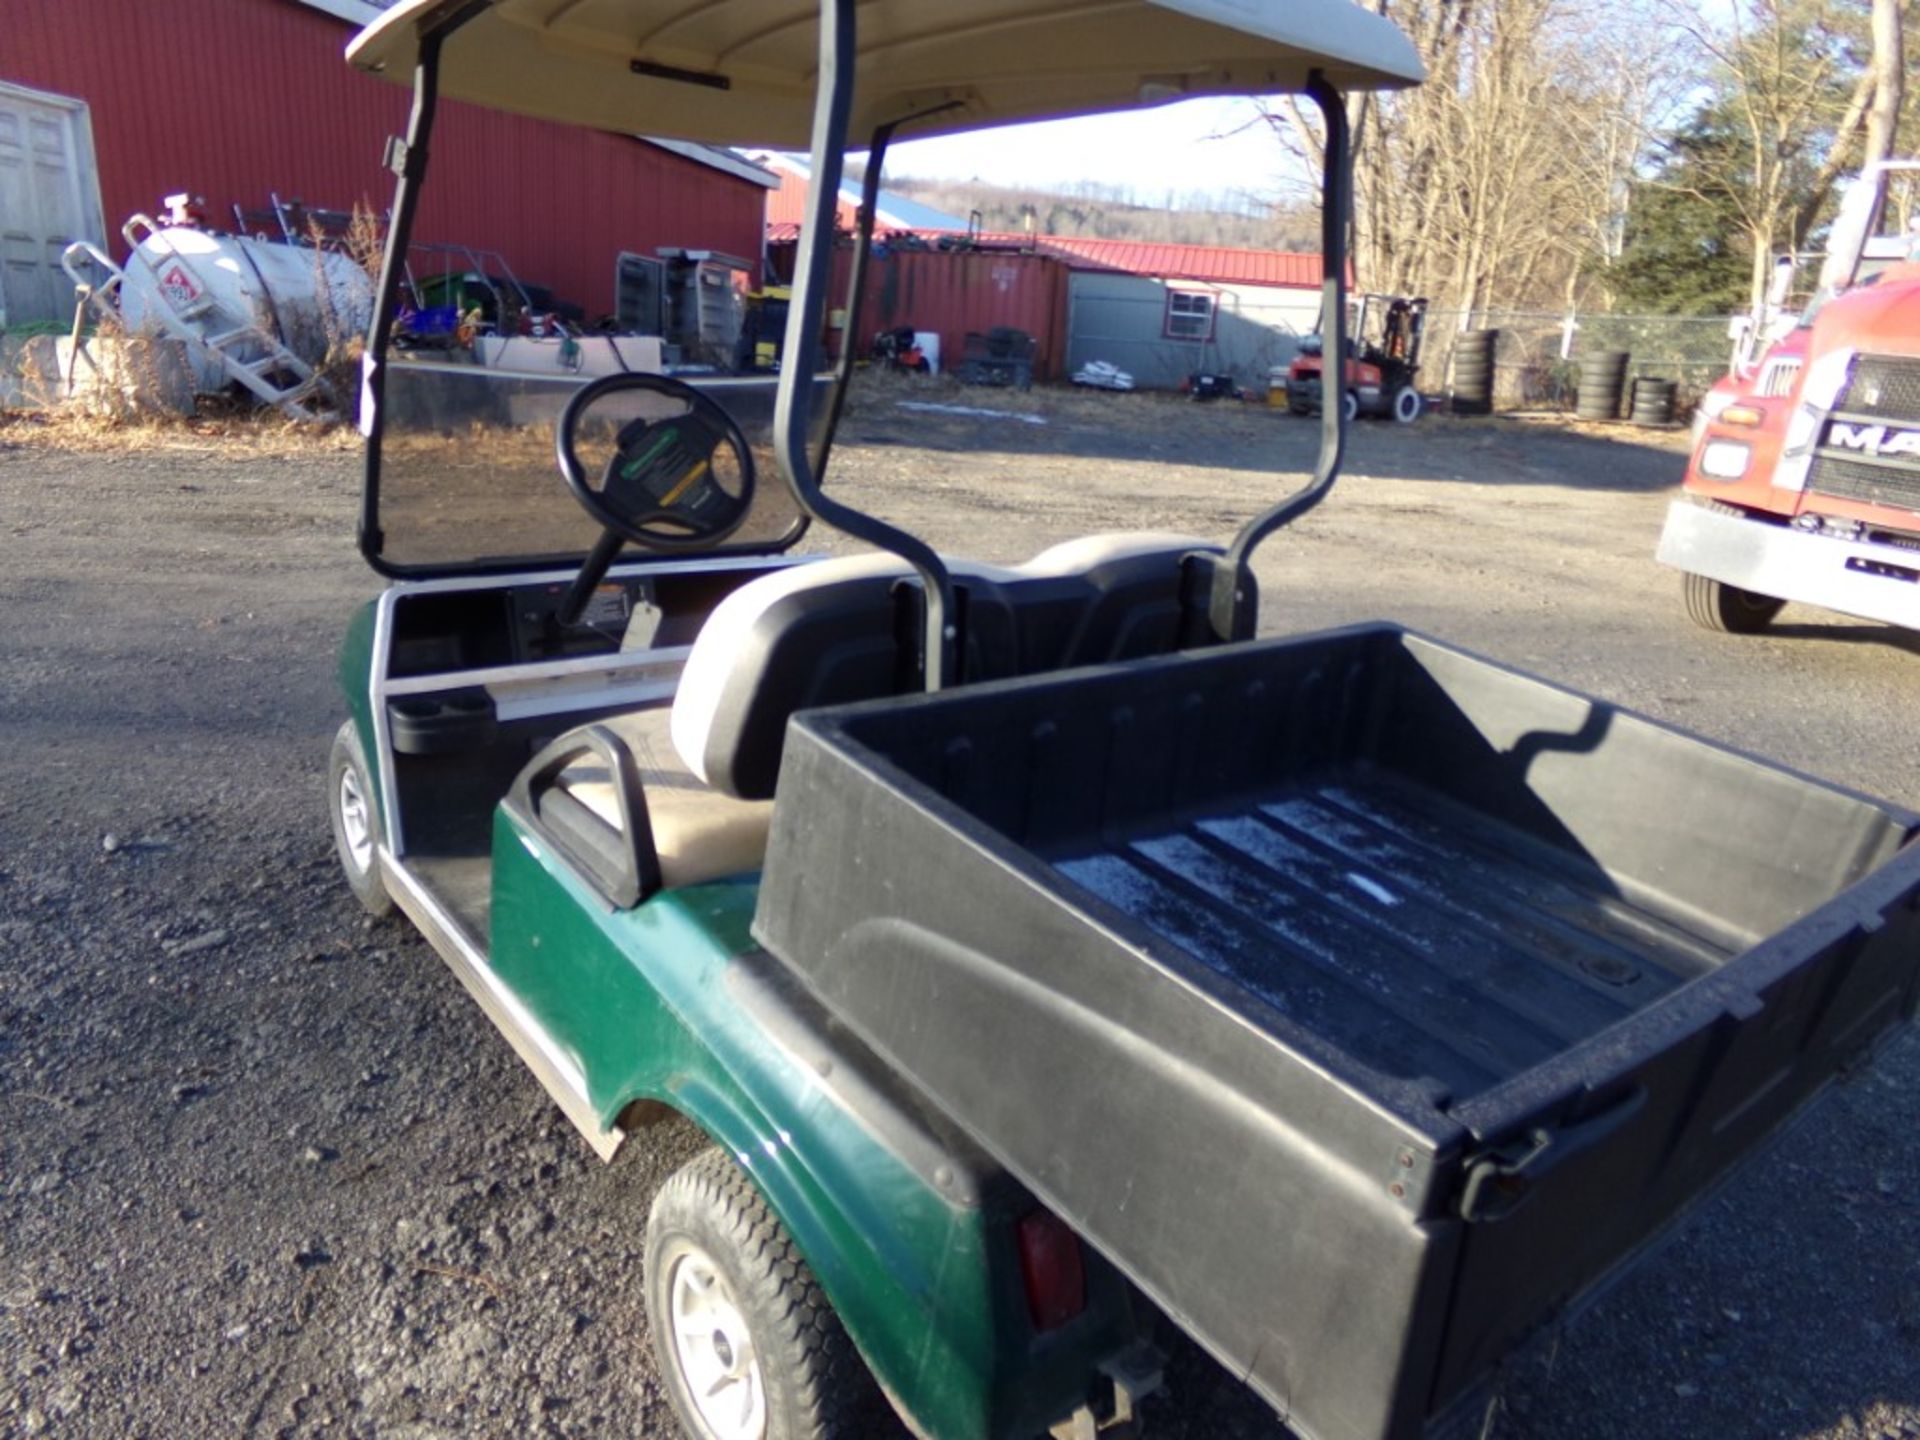 Club Car Gas 2-Seat Golf Cart with Cargo Box, Green and Black, ''5'', Green, Ser # AG1321-370100 - Image 3 of 4